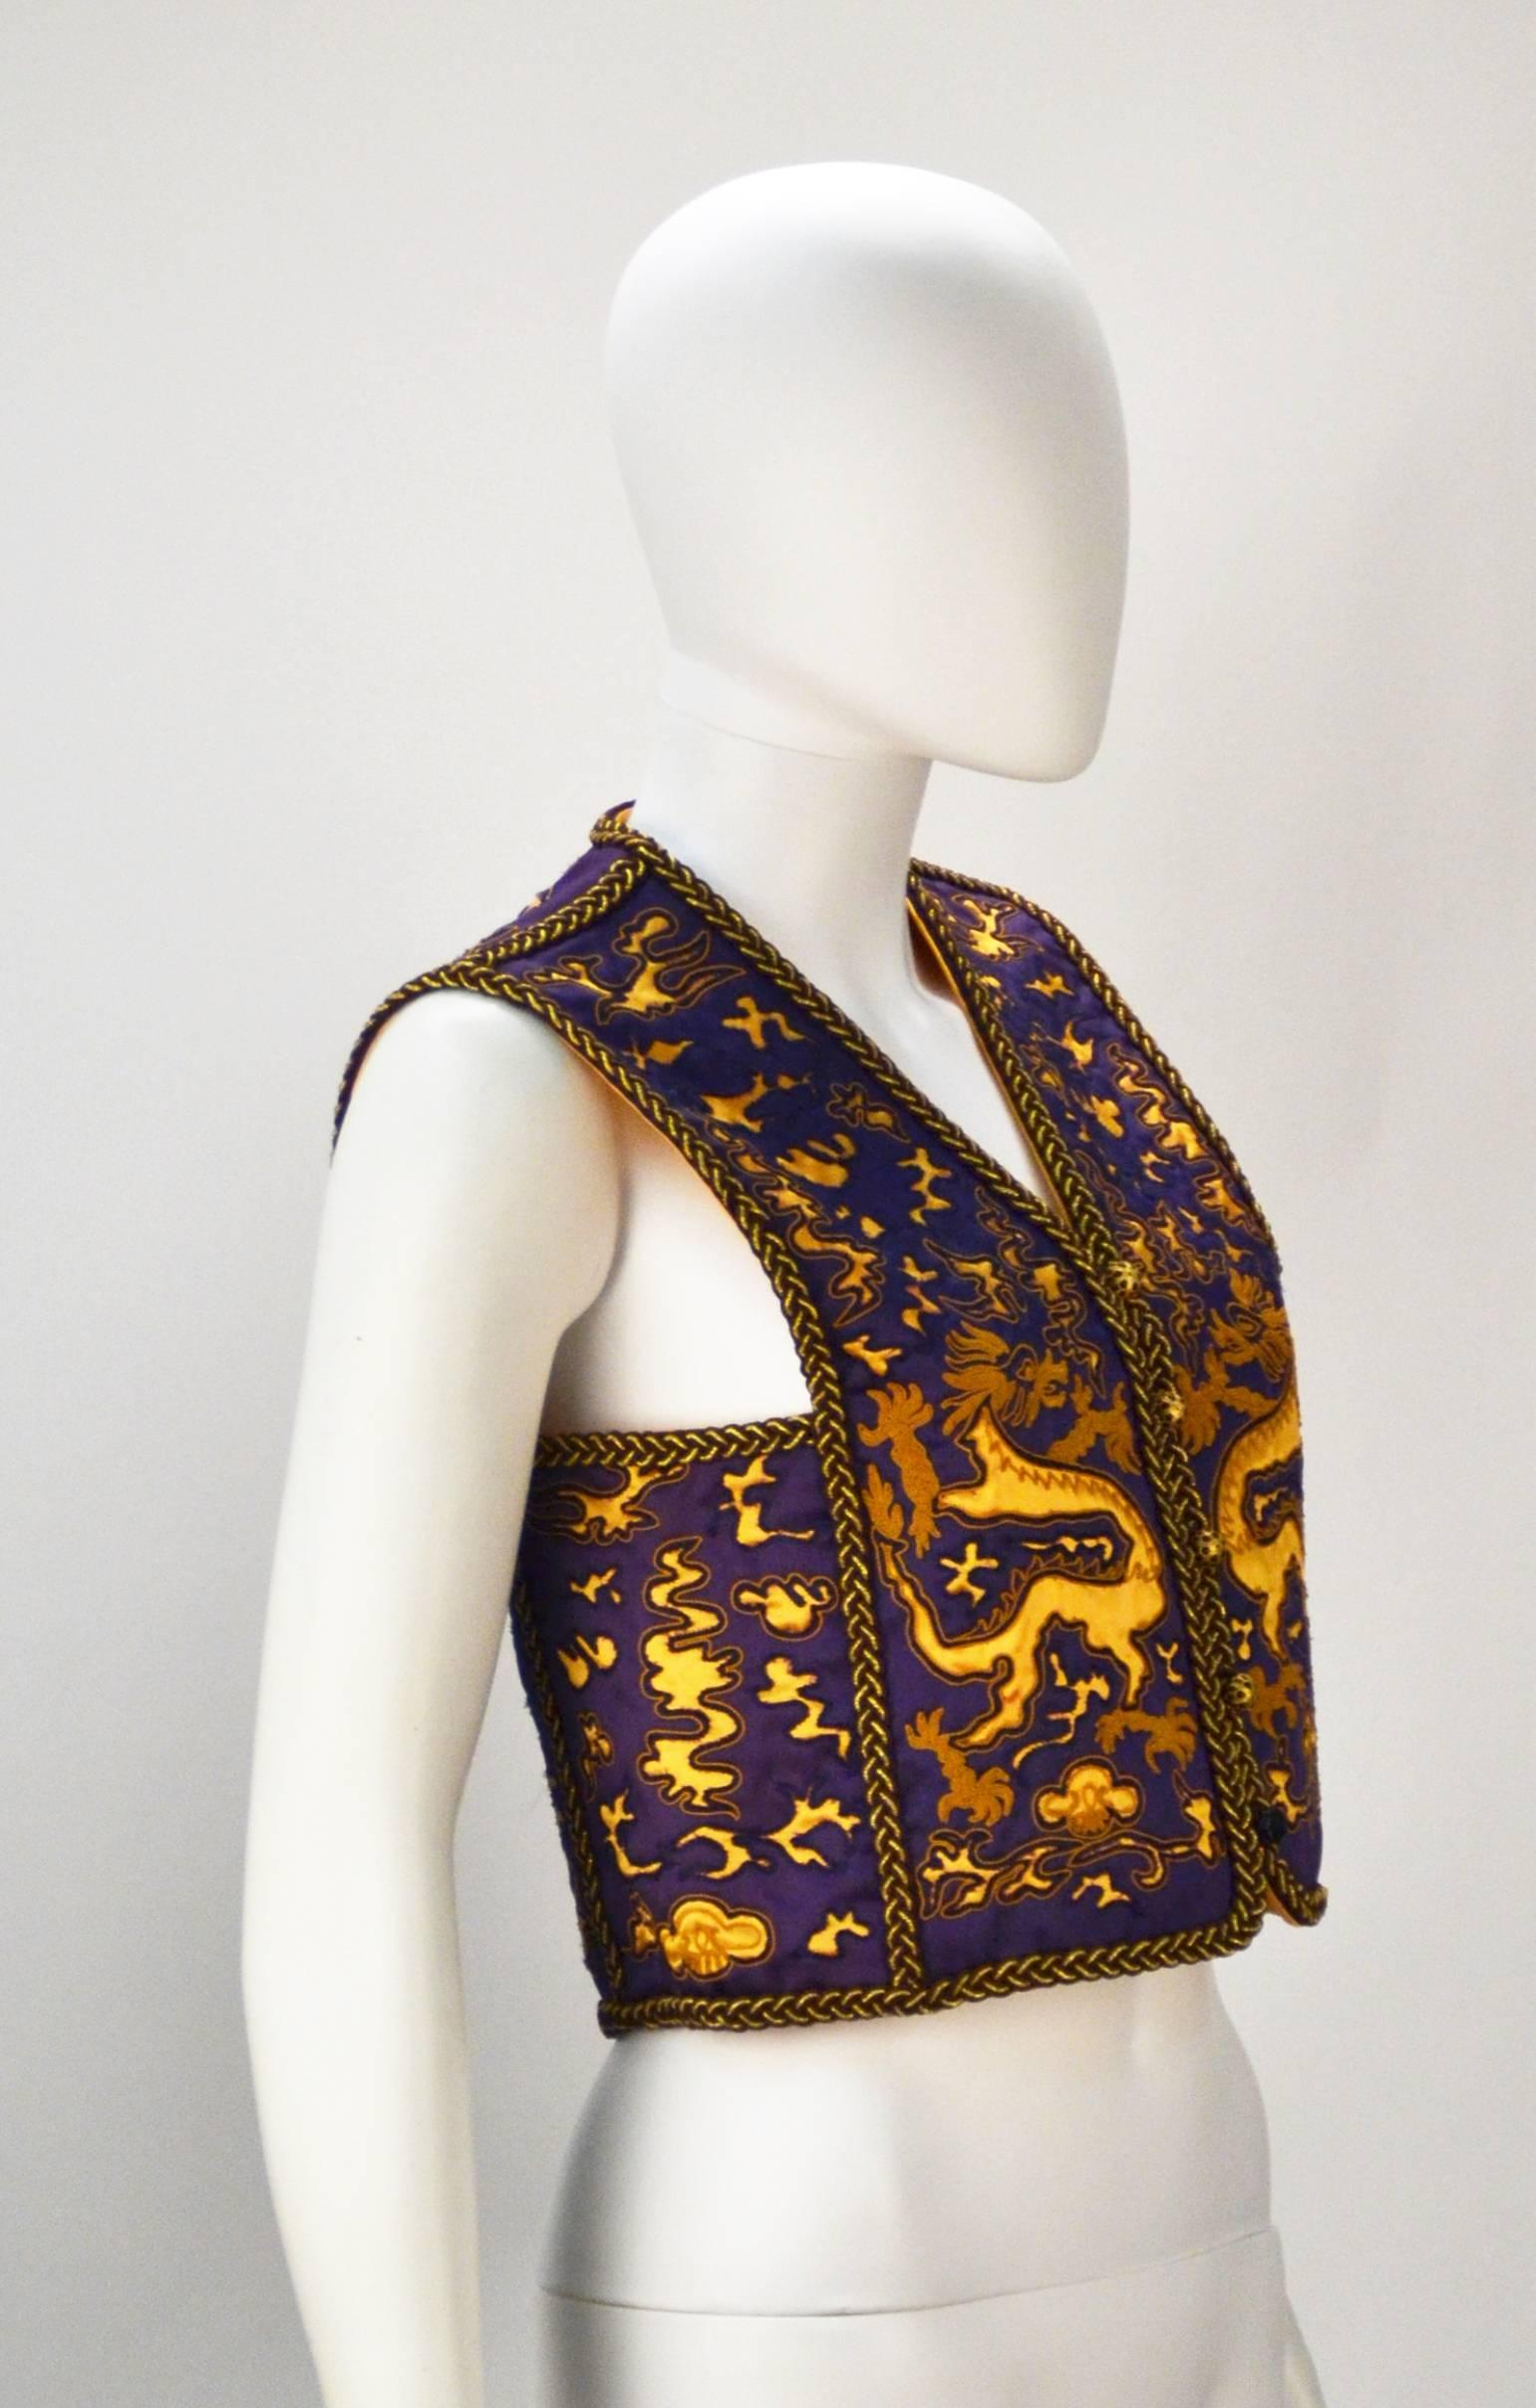 1960's Saint Laurent Rive Gauche purple and light orange Asian inspired with dragon pattern vest. He is known for his love of the dragon, Saint Laurent even owned a 1920's designed dragon chair.  Later designers of the YSL fashion house have paid